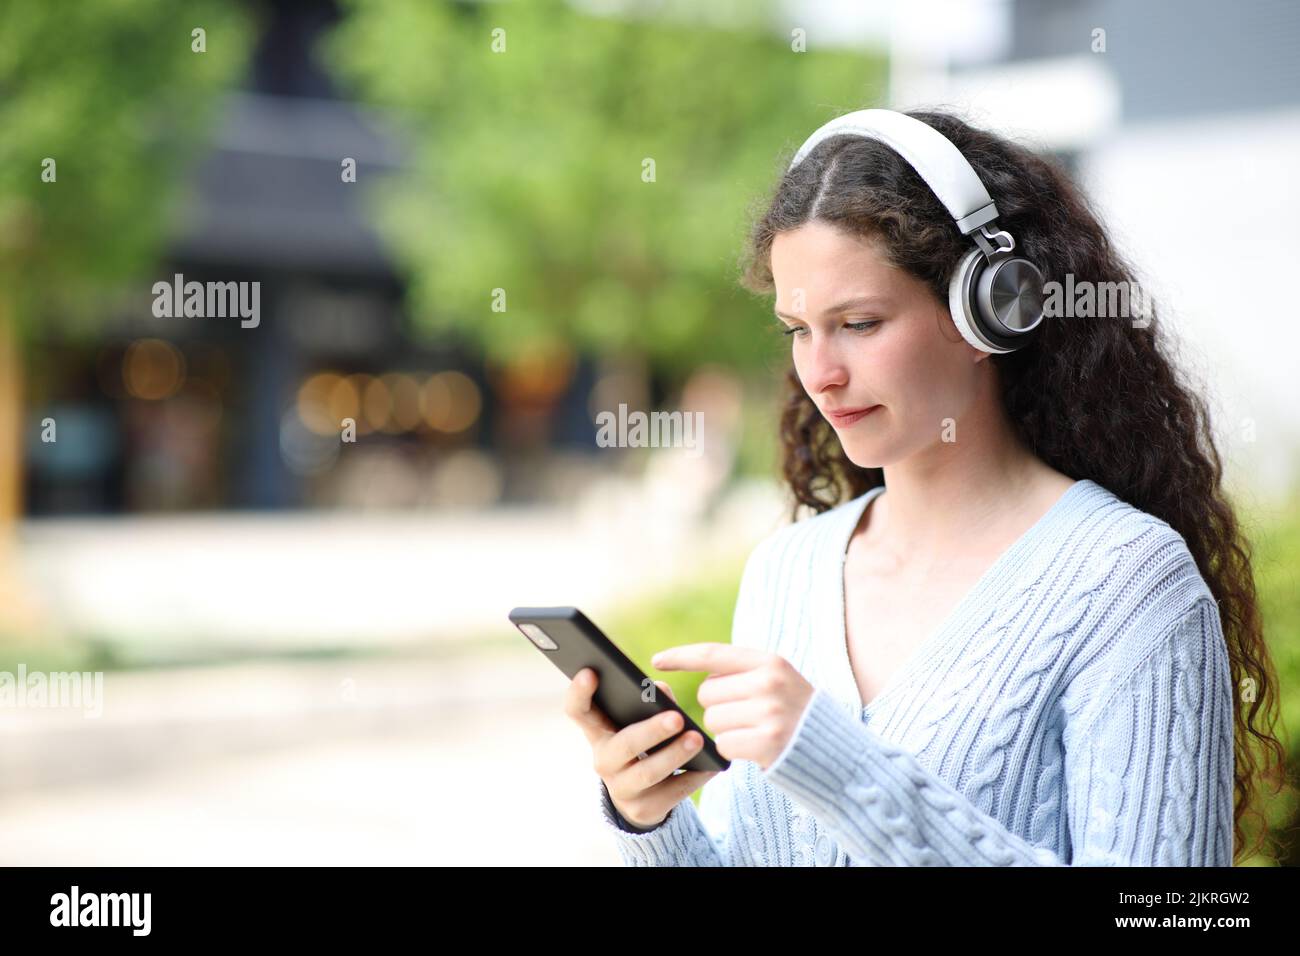 Woman walking using smart phone and wearing headphones to listen to music in the street Stock Photo